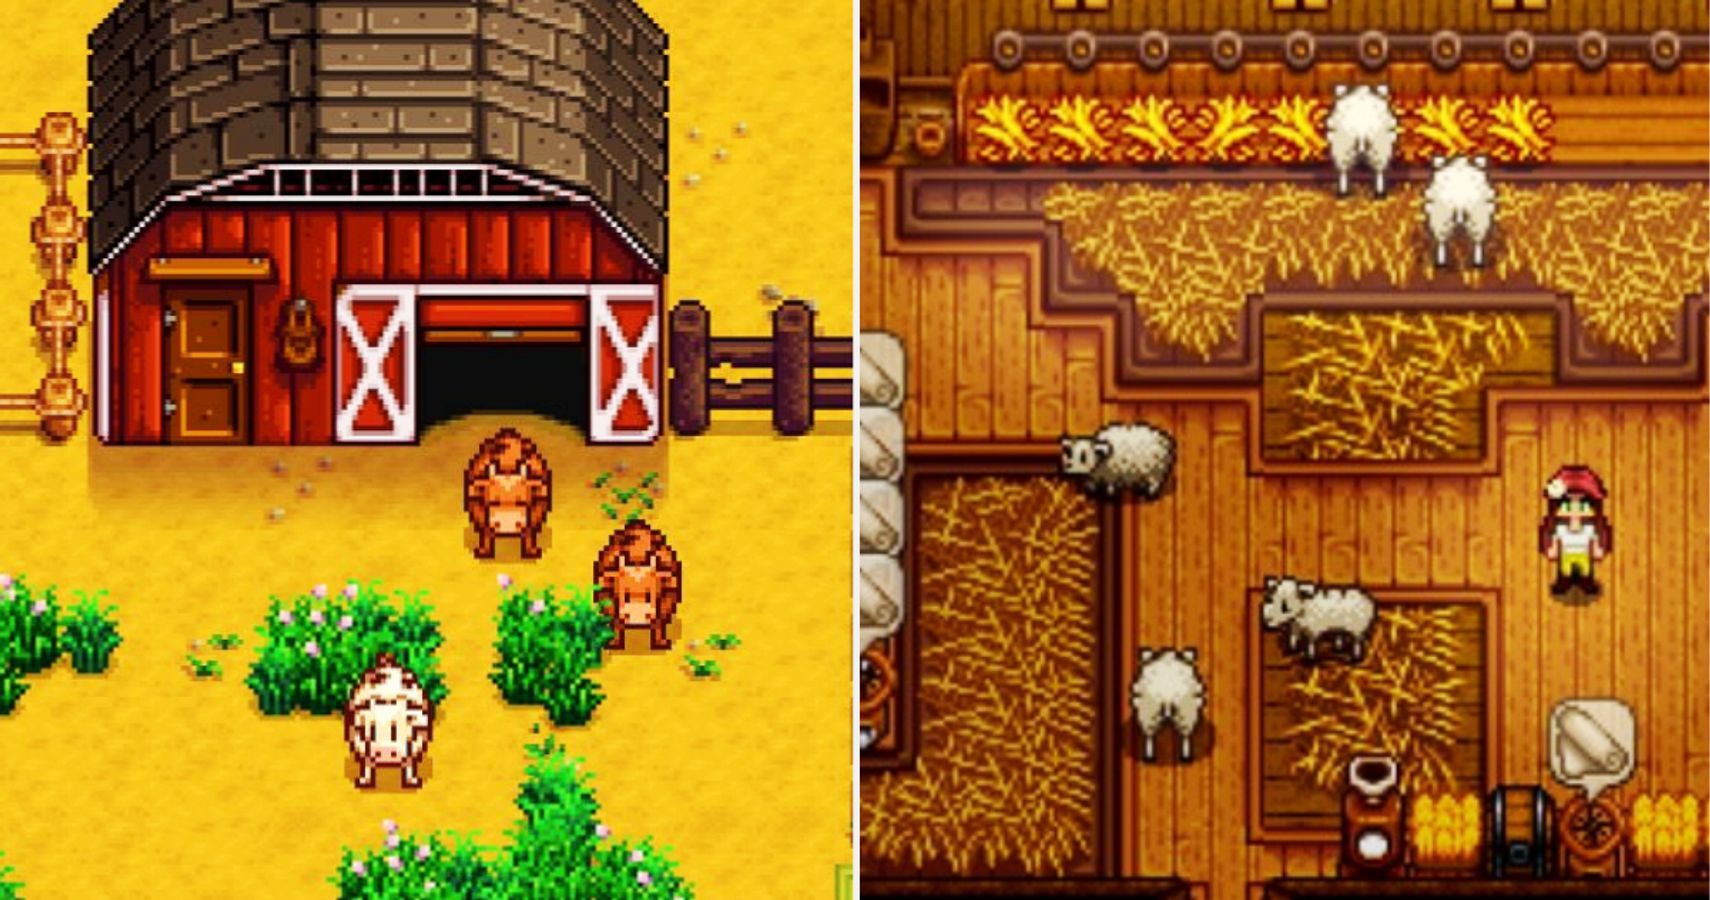 Stardew Valley Barn Animals And Barn From Inside 1 